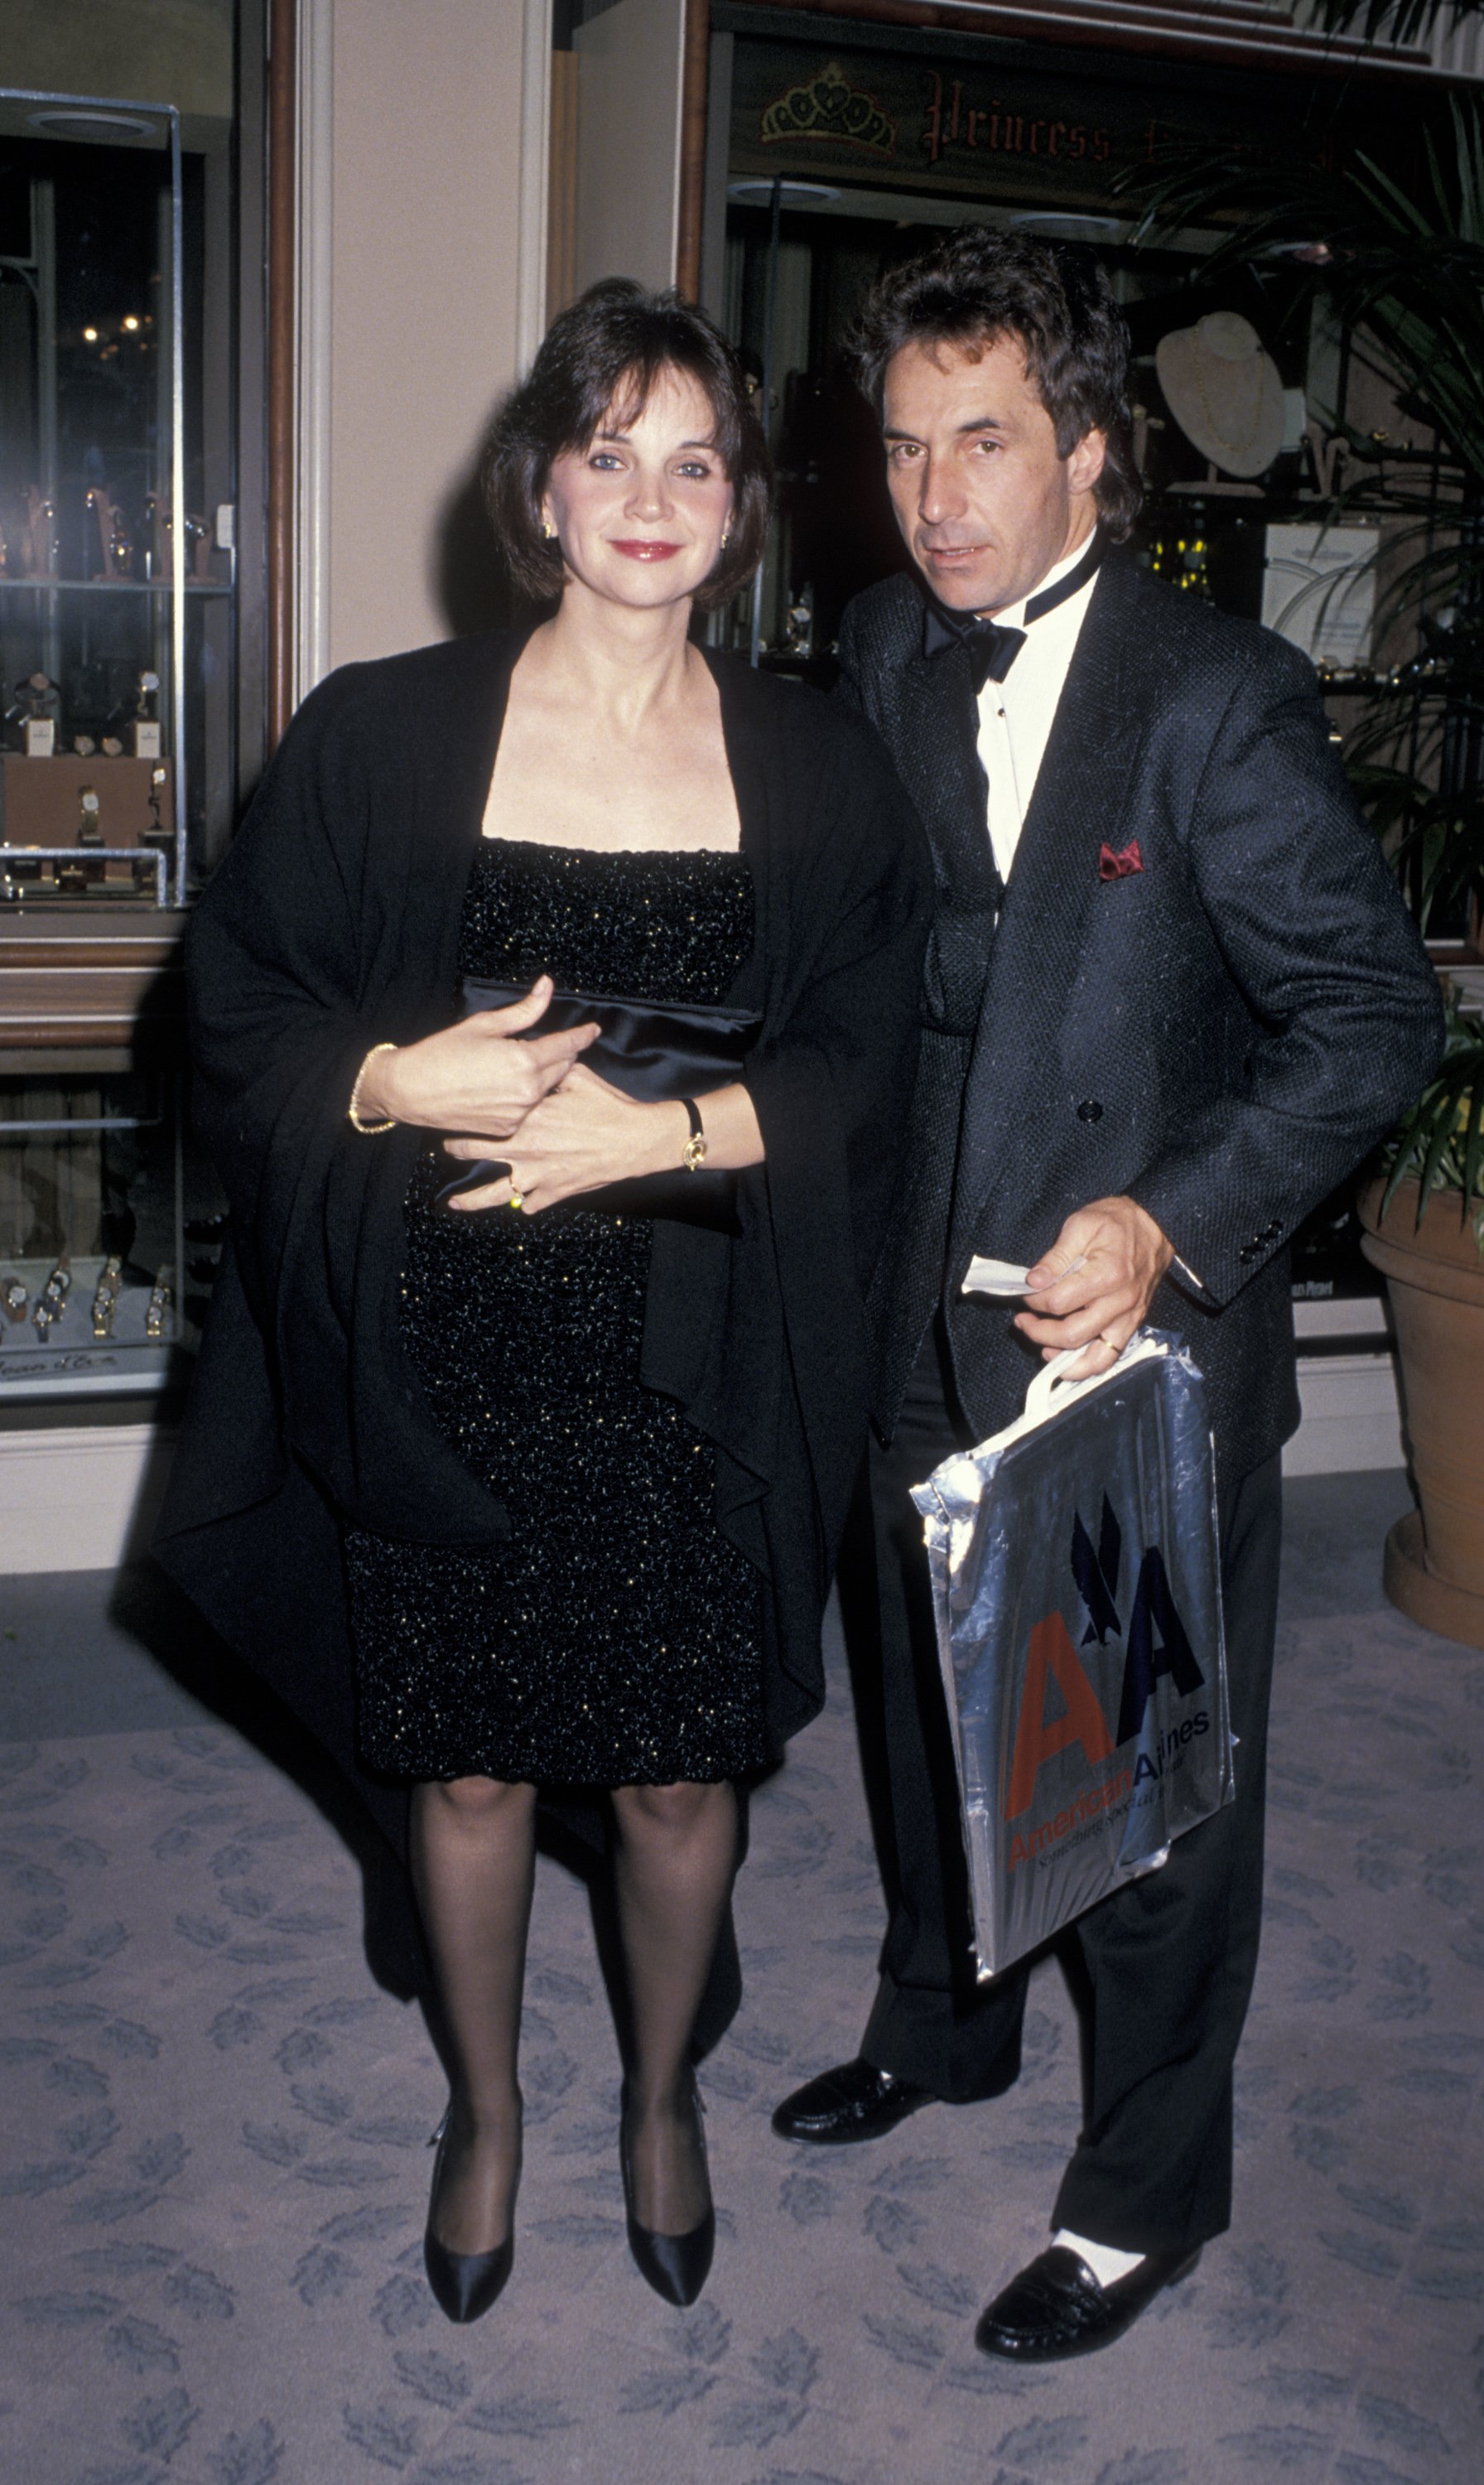 Cindy Williams and Bill Hudson during 6th Annual American Cinema Awards at Beverly Hilton Hotel on January 6, 1989 in Beverly Hills, California | Source: Getty Images